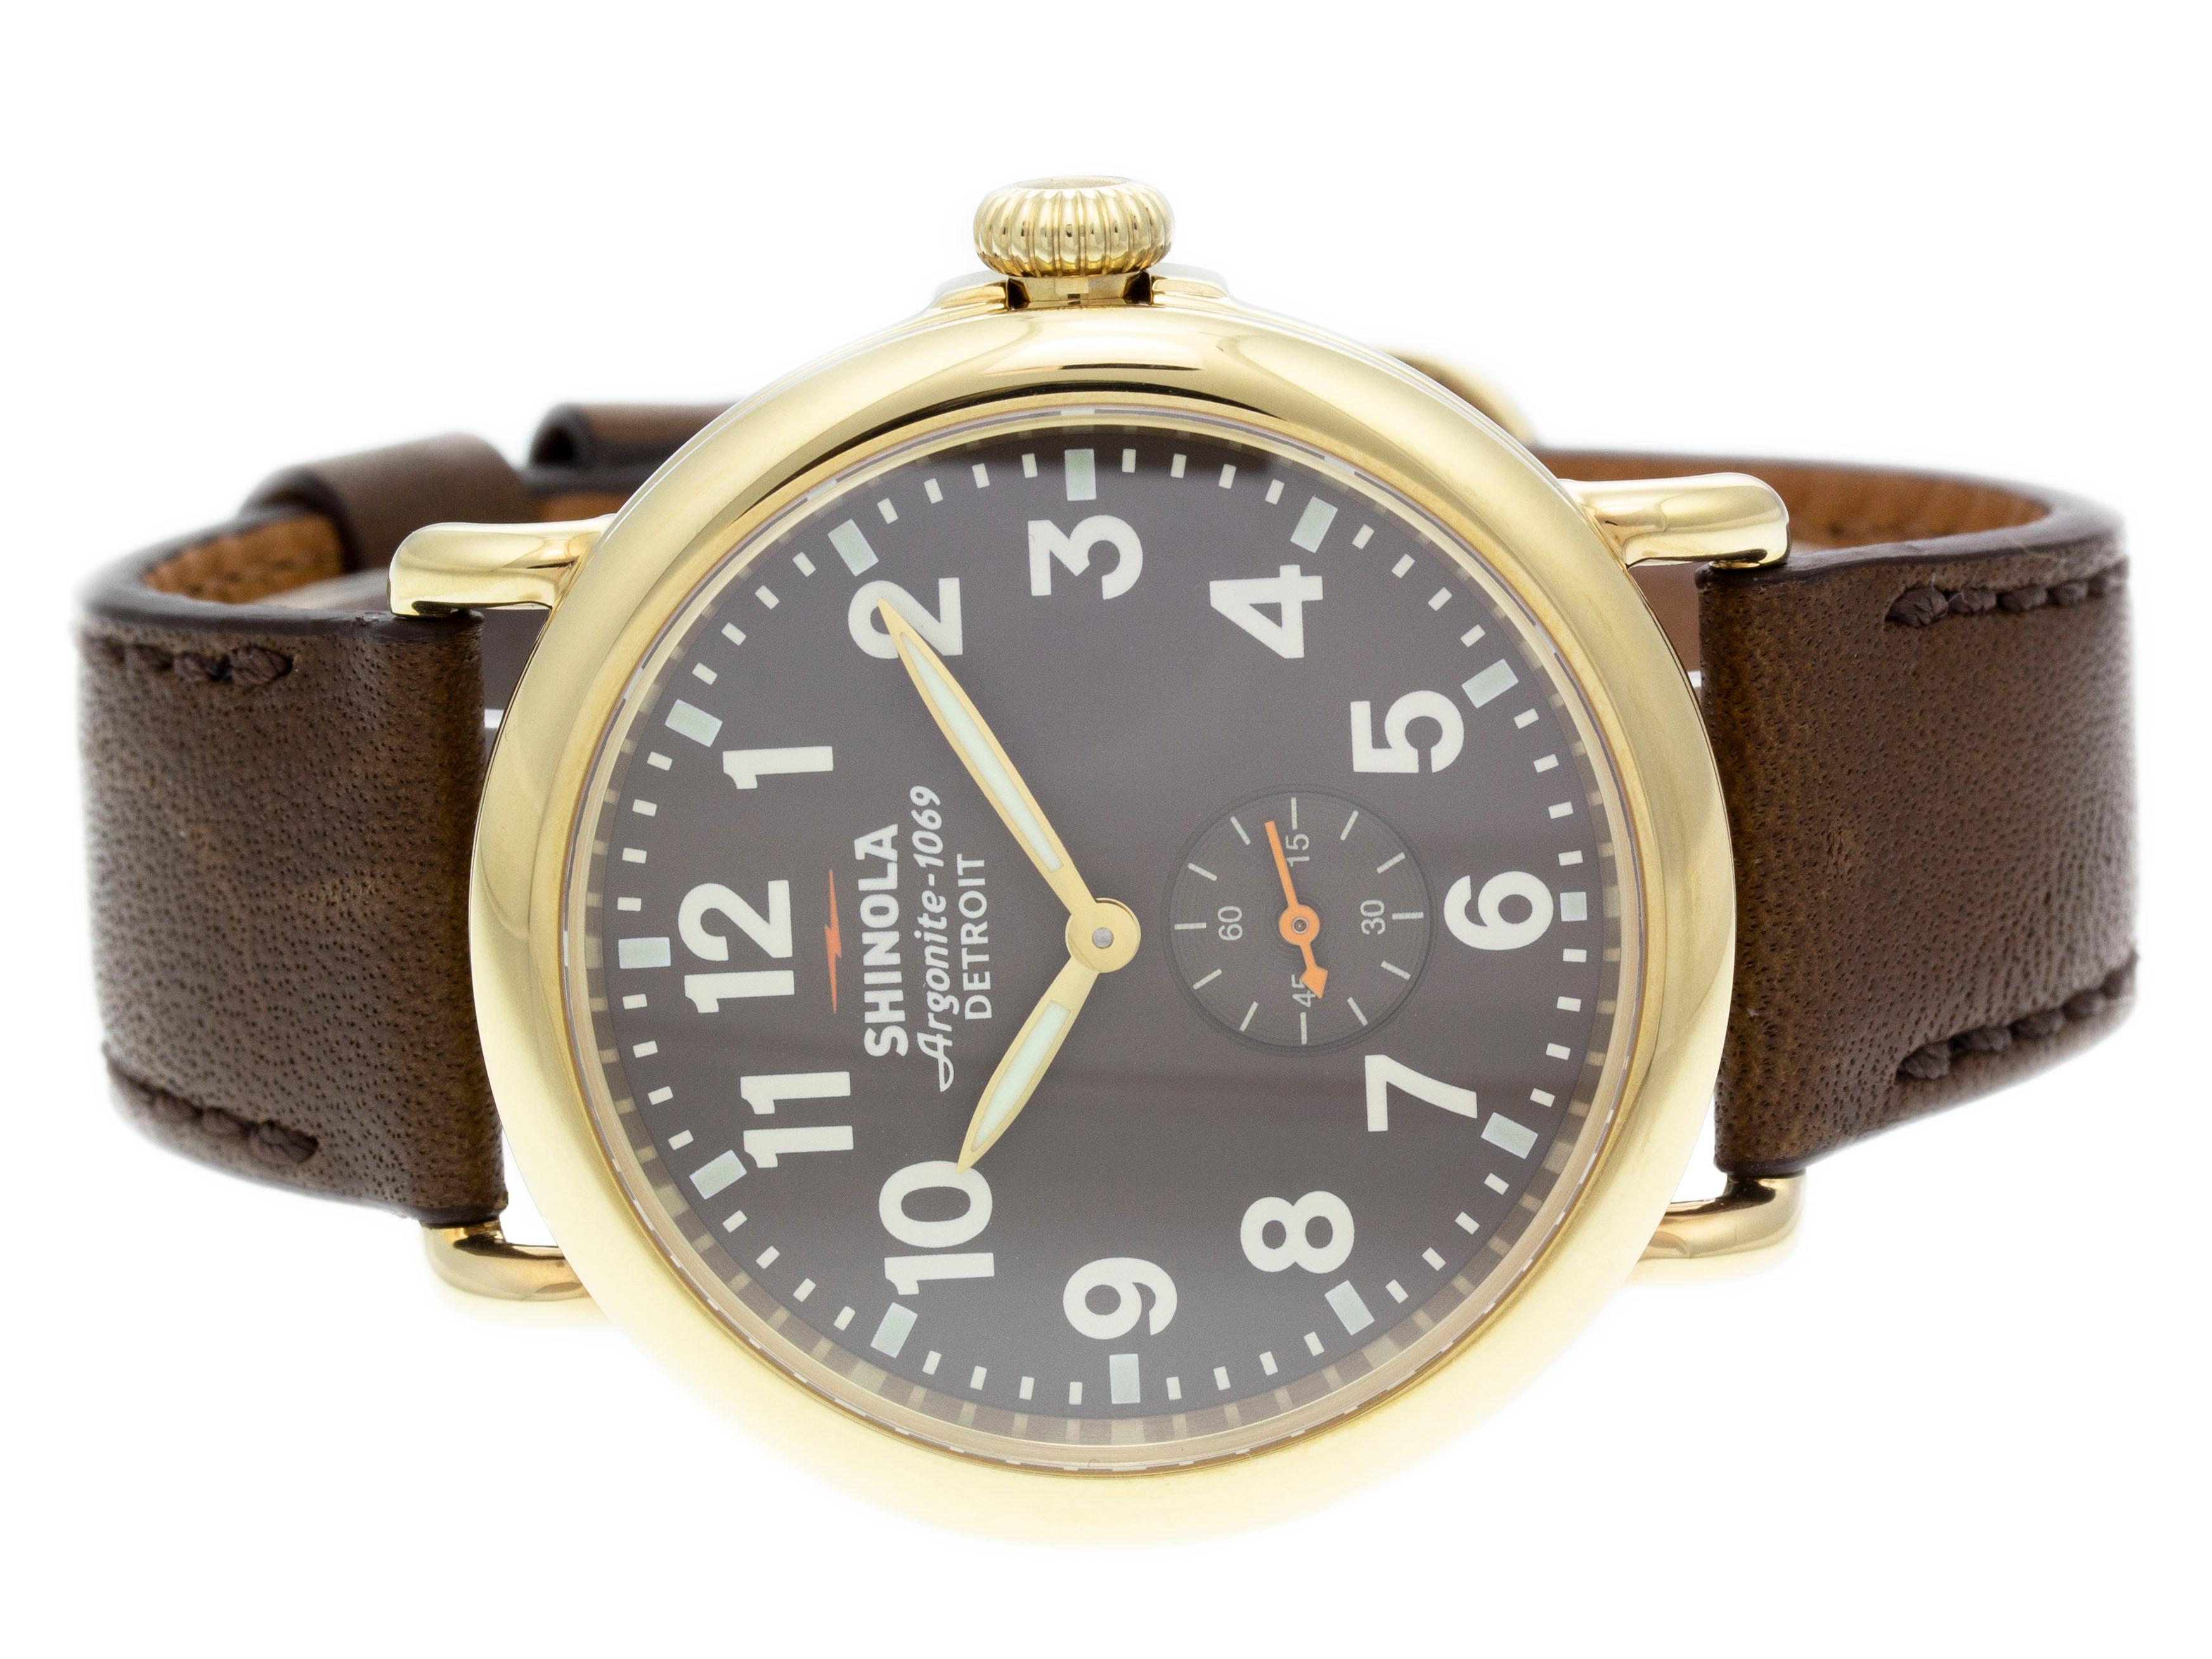 Gold PVD steel Shinola The Runwell quartz watch with a 41mm case, heather brown / gray dial, and brown leather strap with tang buckle. Features include hours, minutes, seconds. Comes with a Generic Gift Box and 2 Year Store